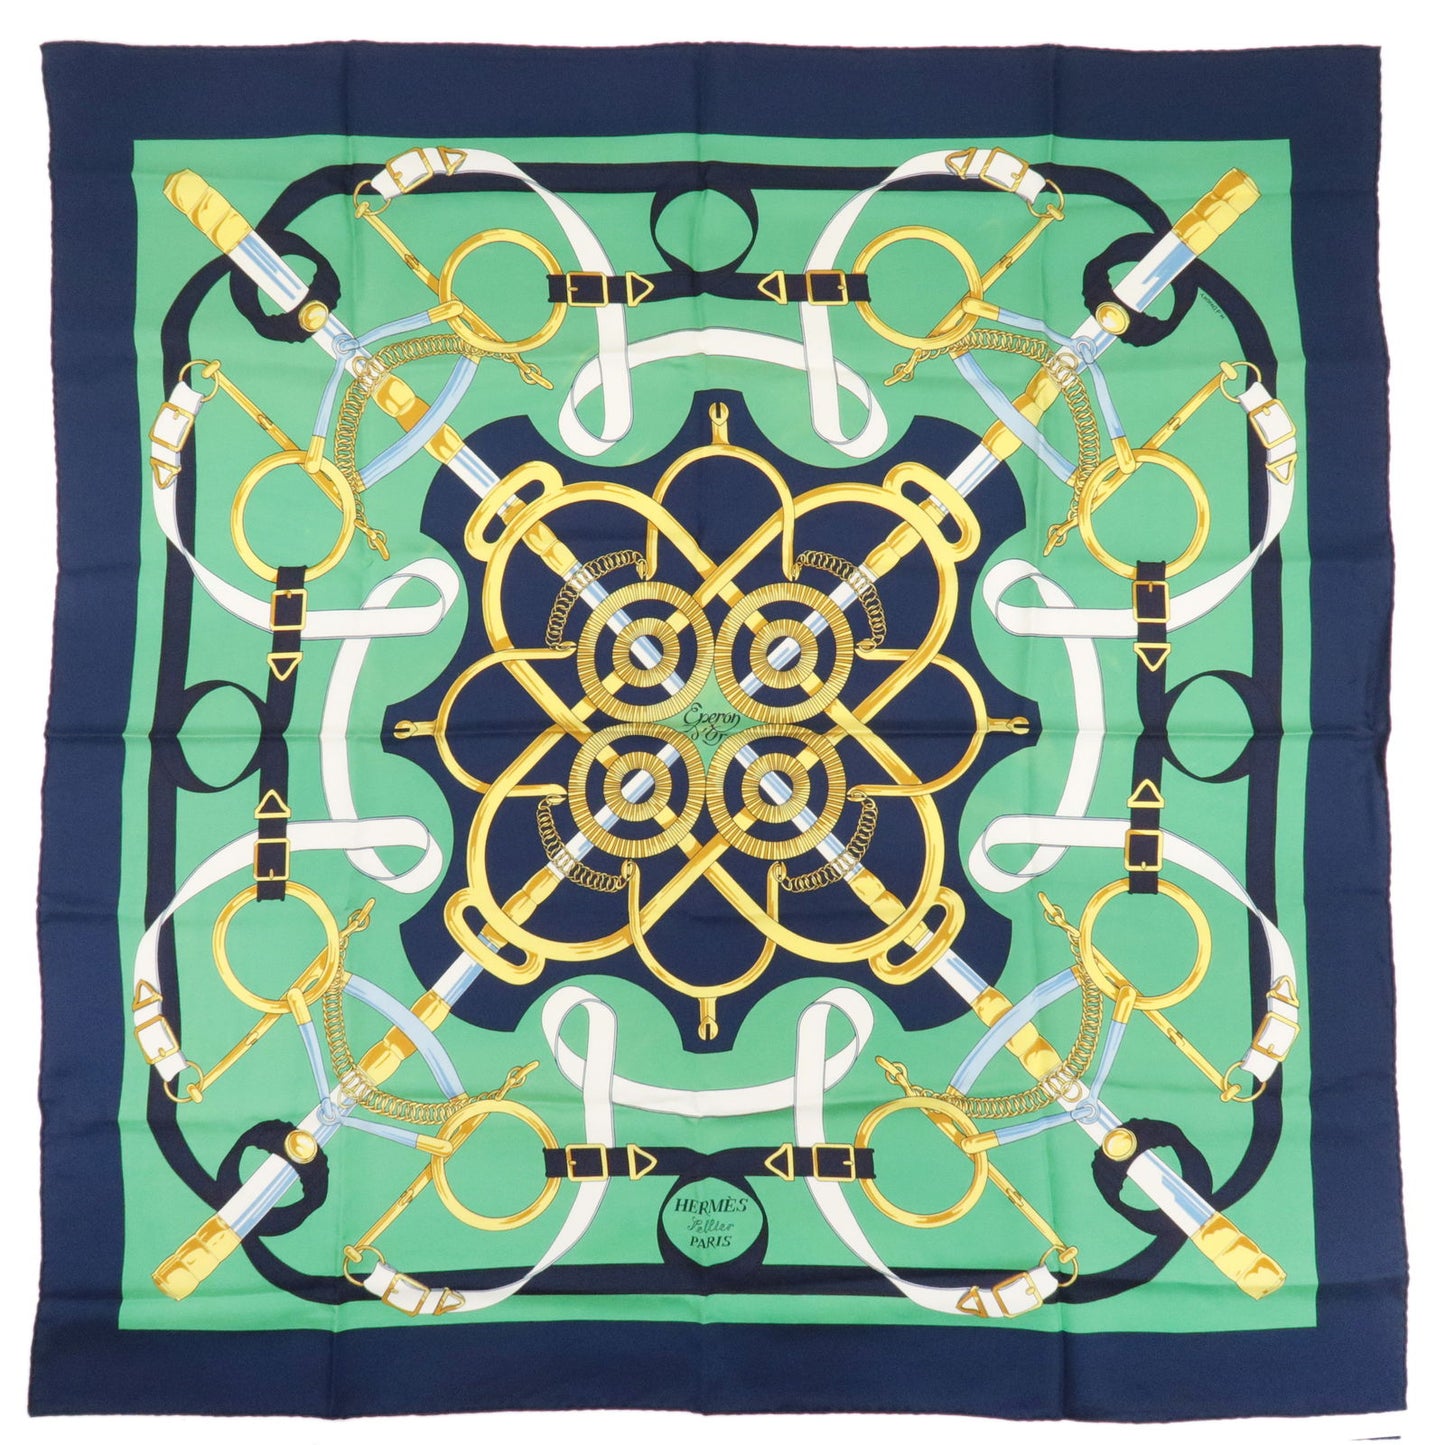 HERMES-Carre-90-Silk-100%-Scarf-EPERON-D'OR-Spur-Print-Green